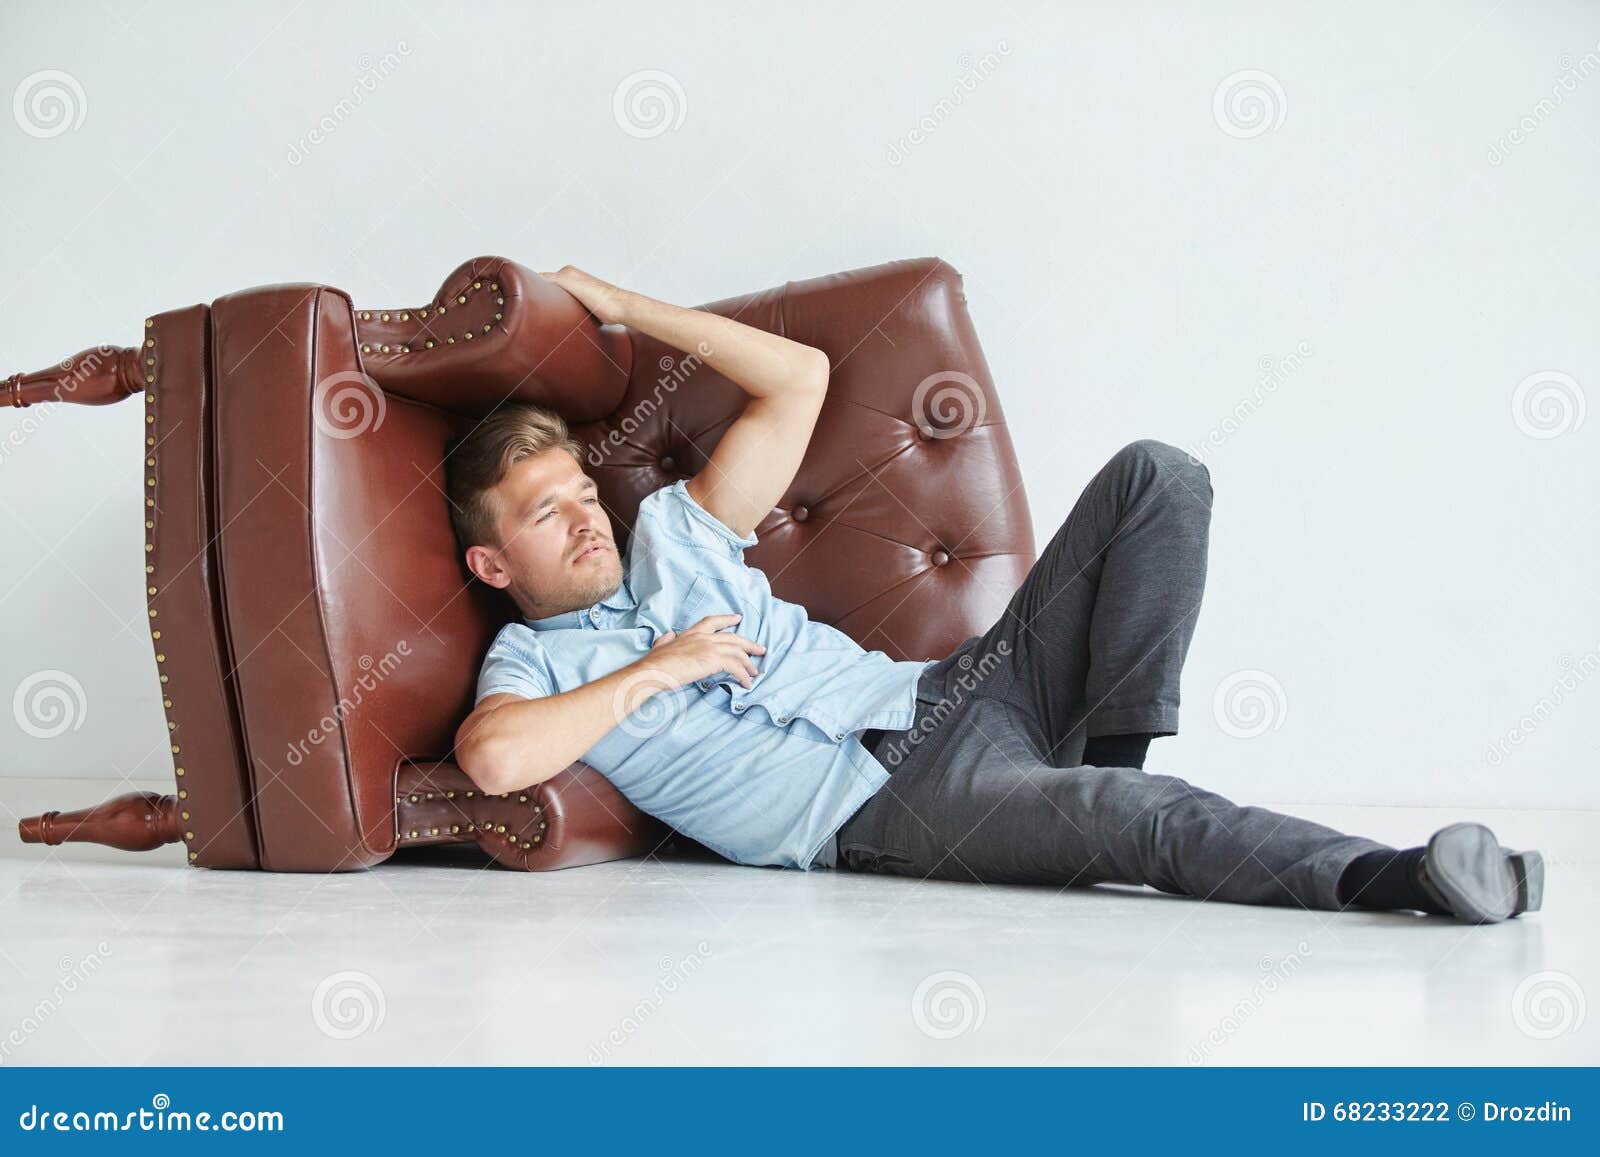 Brutal Man Lying Next To a Brown Leather Armchair Stock Photo - Image ...